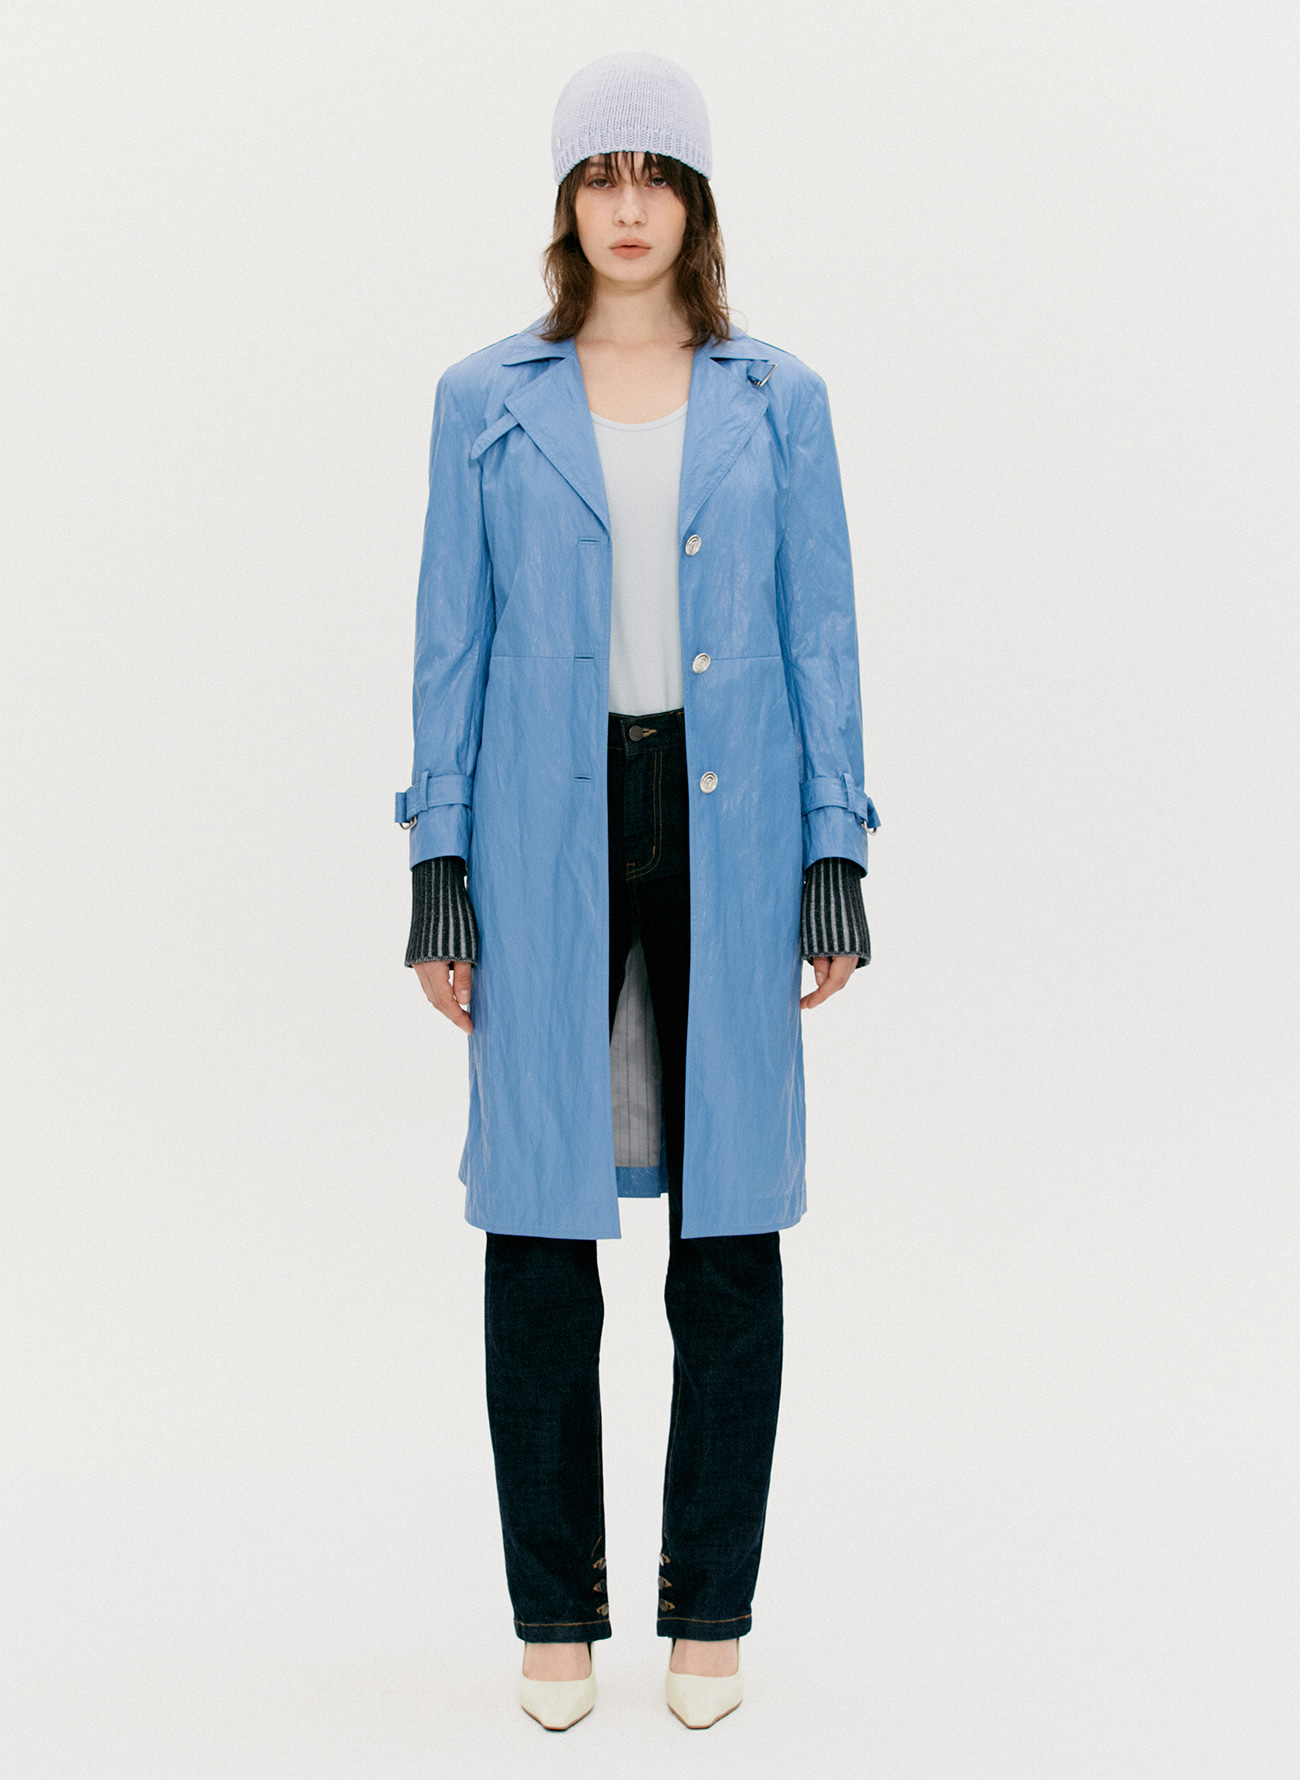 AIR WASHED TRENCH COAT, SKY BLUE